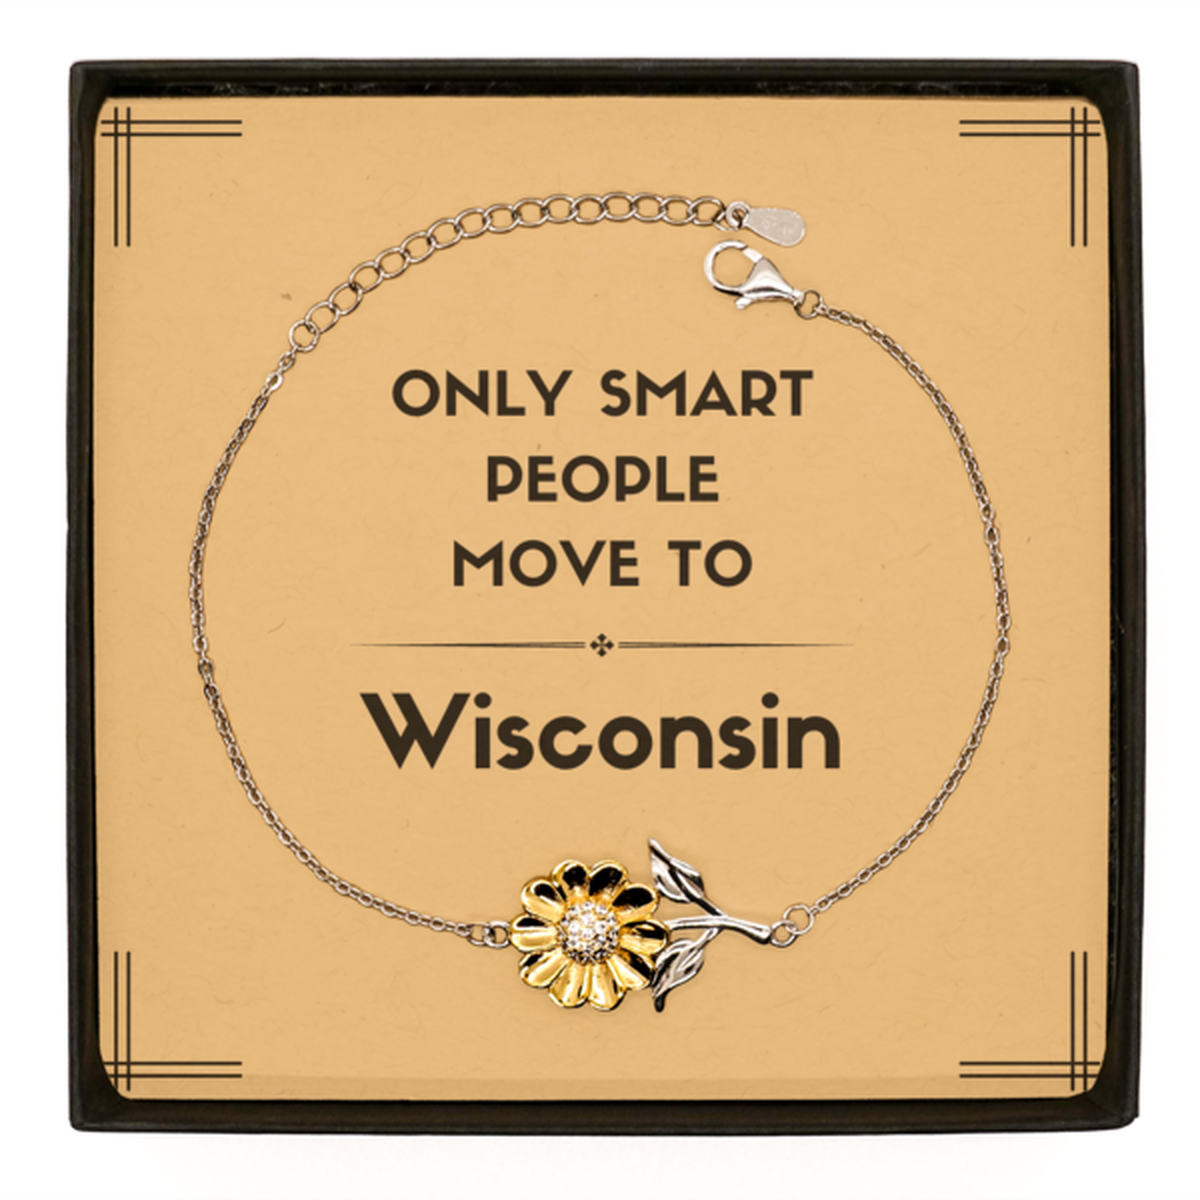 Only smart people move to Wisconsin Sunflower Bracelet, Message Card Gifts For Wisconsin, Move to Wisconsin Gifts for Friends Coworker Funny Saying Quote